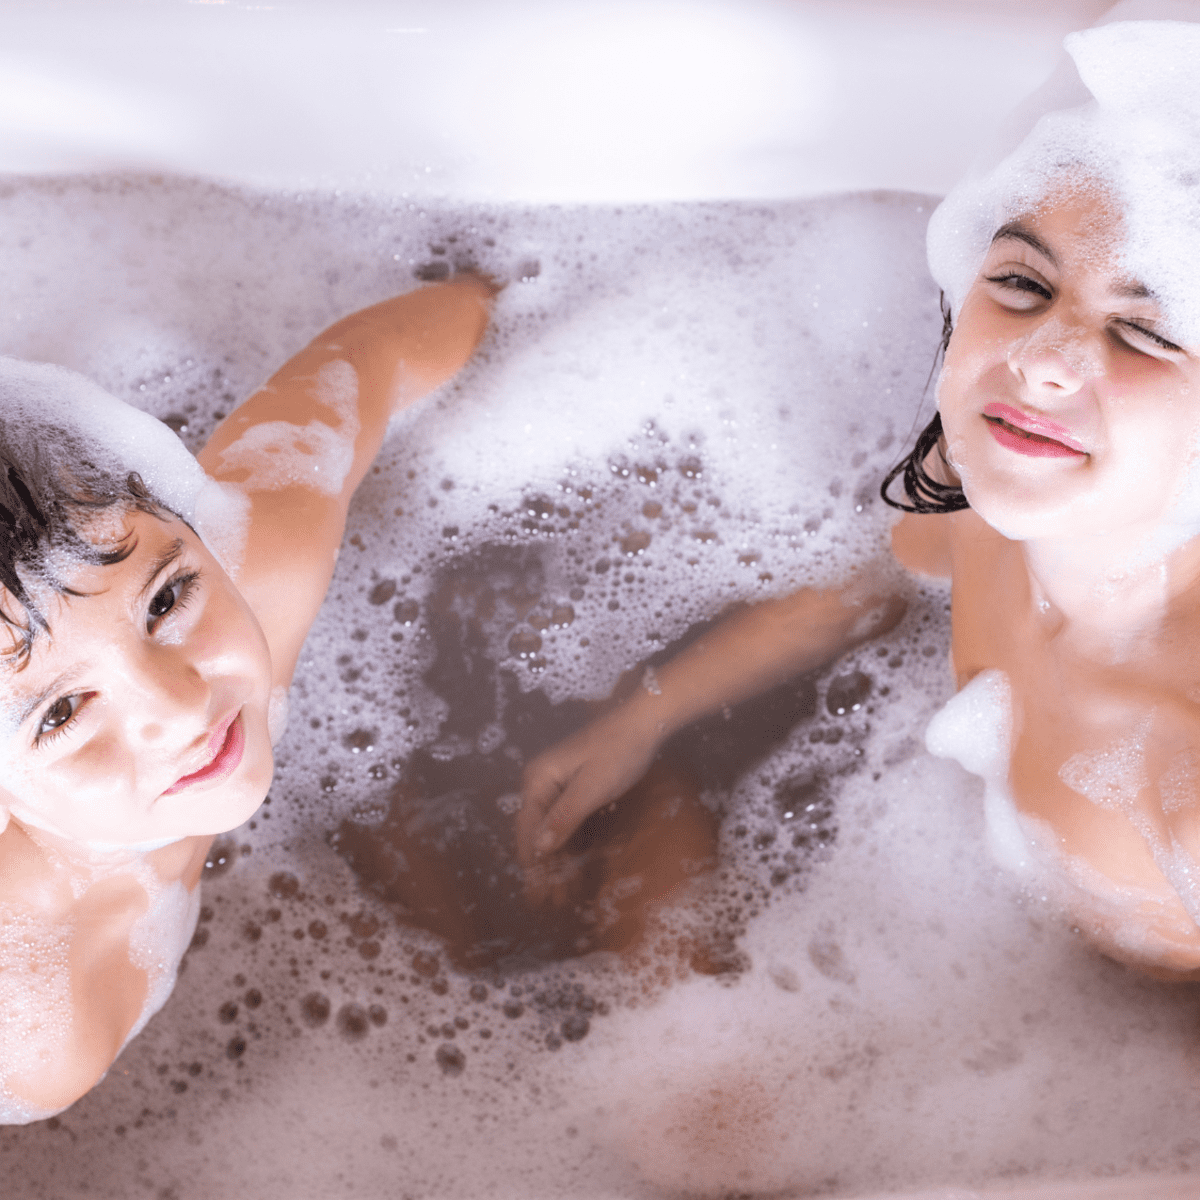 aydin acar recommends How To Take A Bath With Your Girlfriend